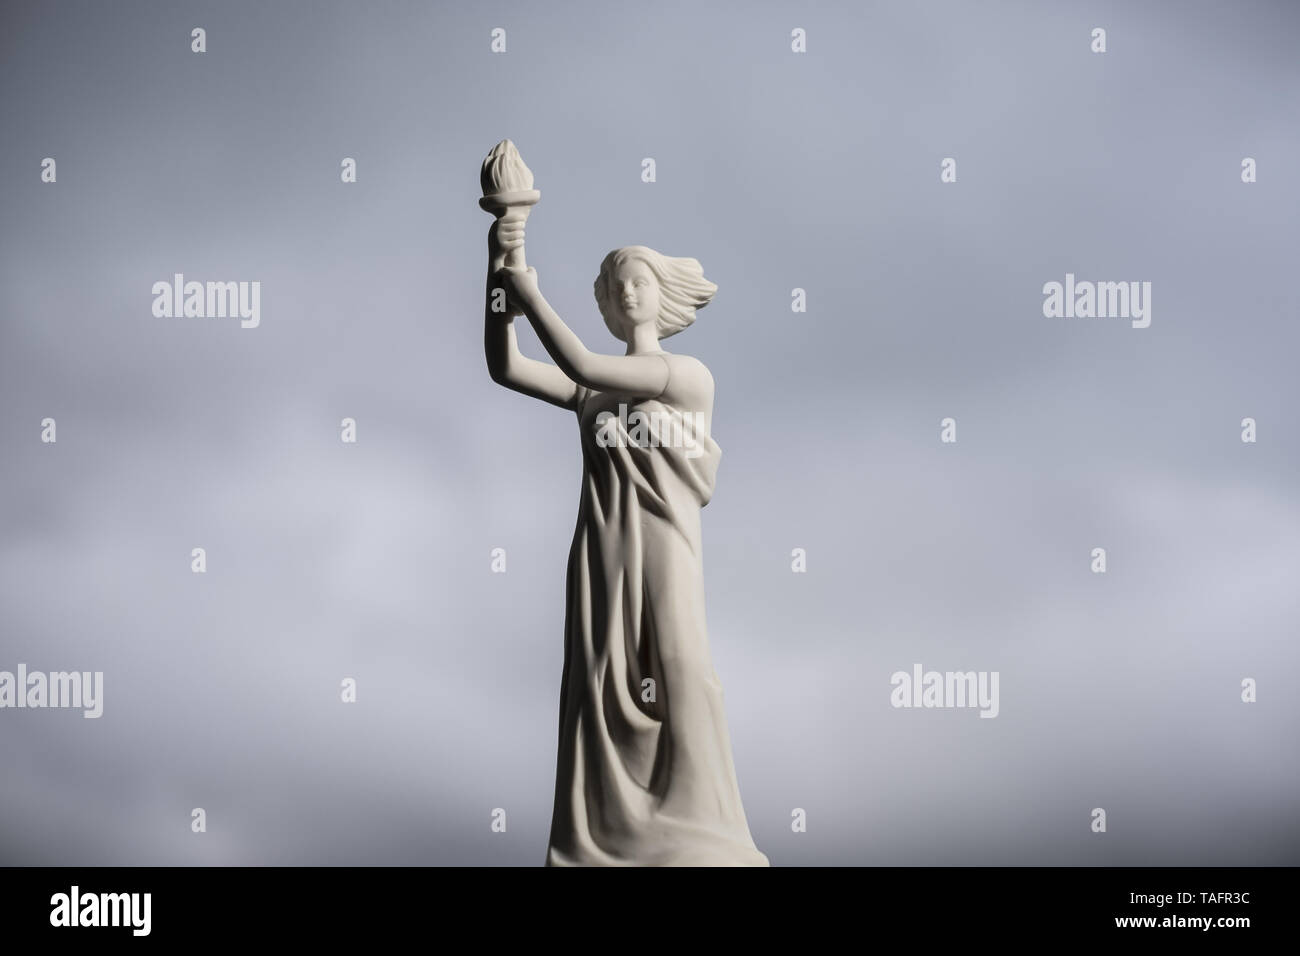 Hong Kong, China. 25th May, 2019. A view of a statue of Goddess of Democracy, also known as Goddess of Liberty in Hong Kong.The Statues was created during the Tiananmen Square protests of 1989 by the students. Credit: Chan Long Hei/SOPA Images/ZUMA Wire/Alamy Live News Stock Photo